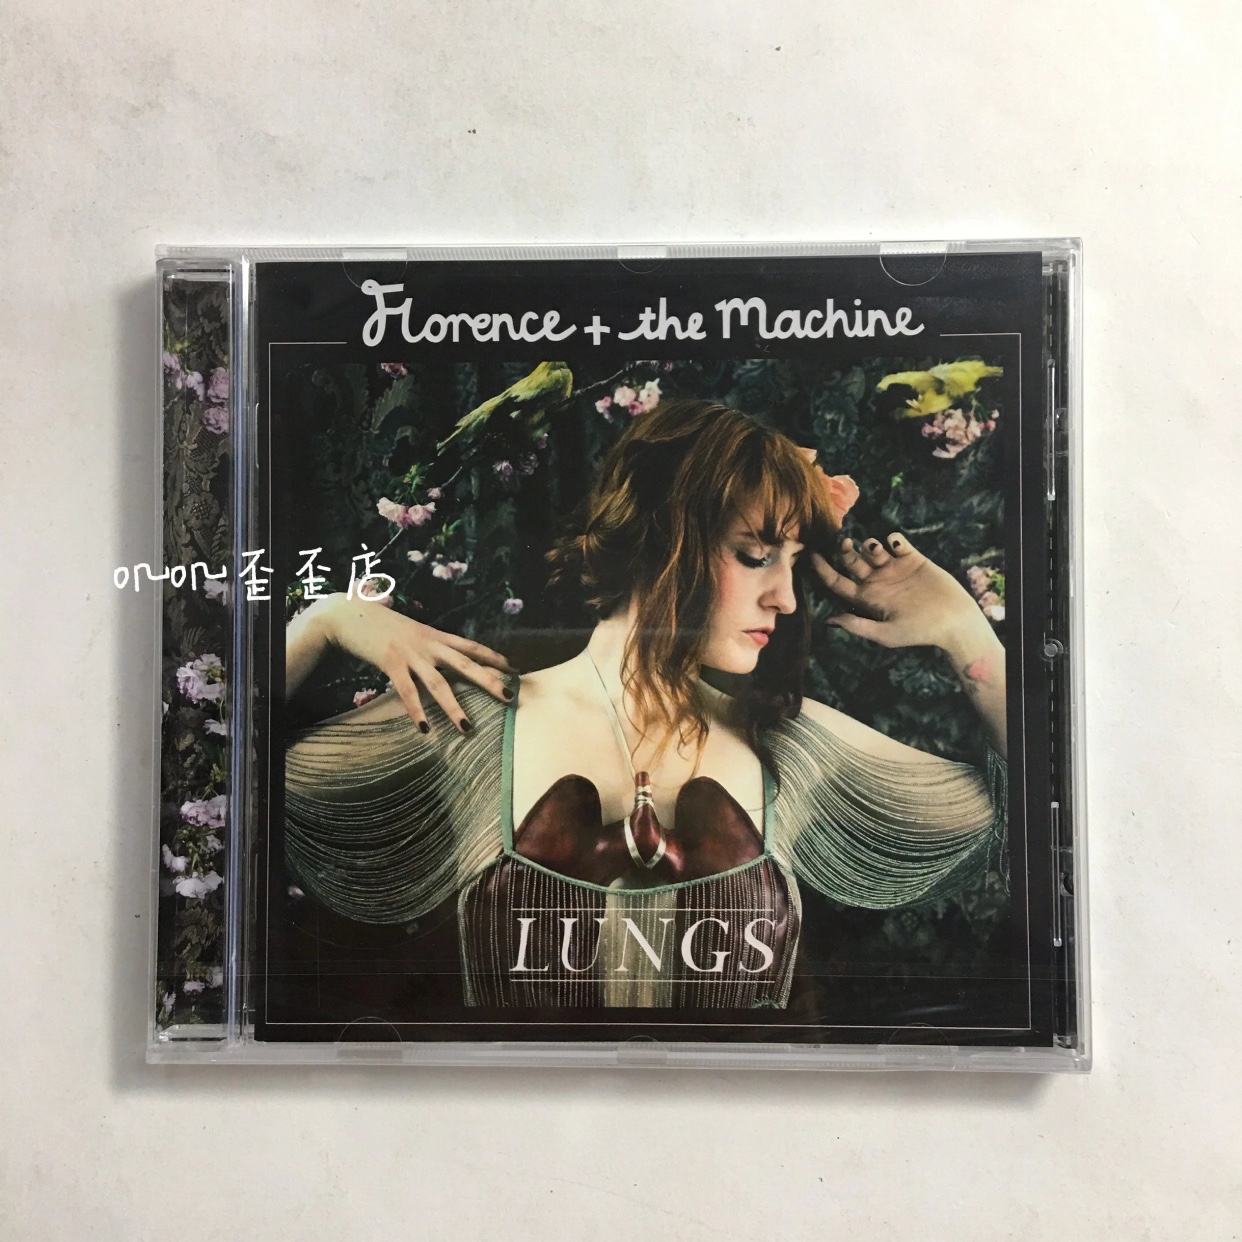   FLORENCE AND THE MACHINE - LUNGS  ǰ ̰ CD-